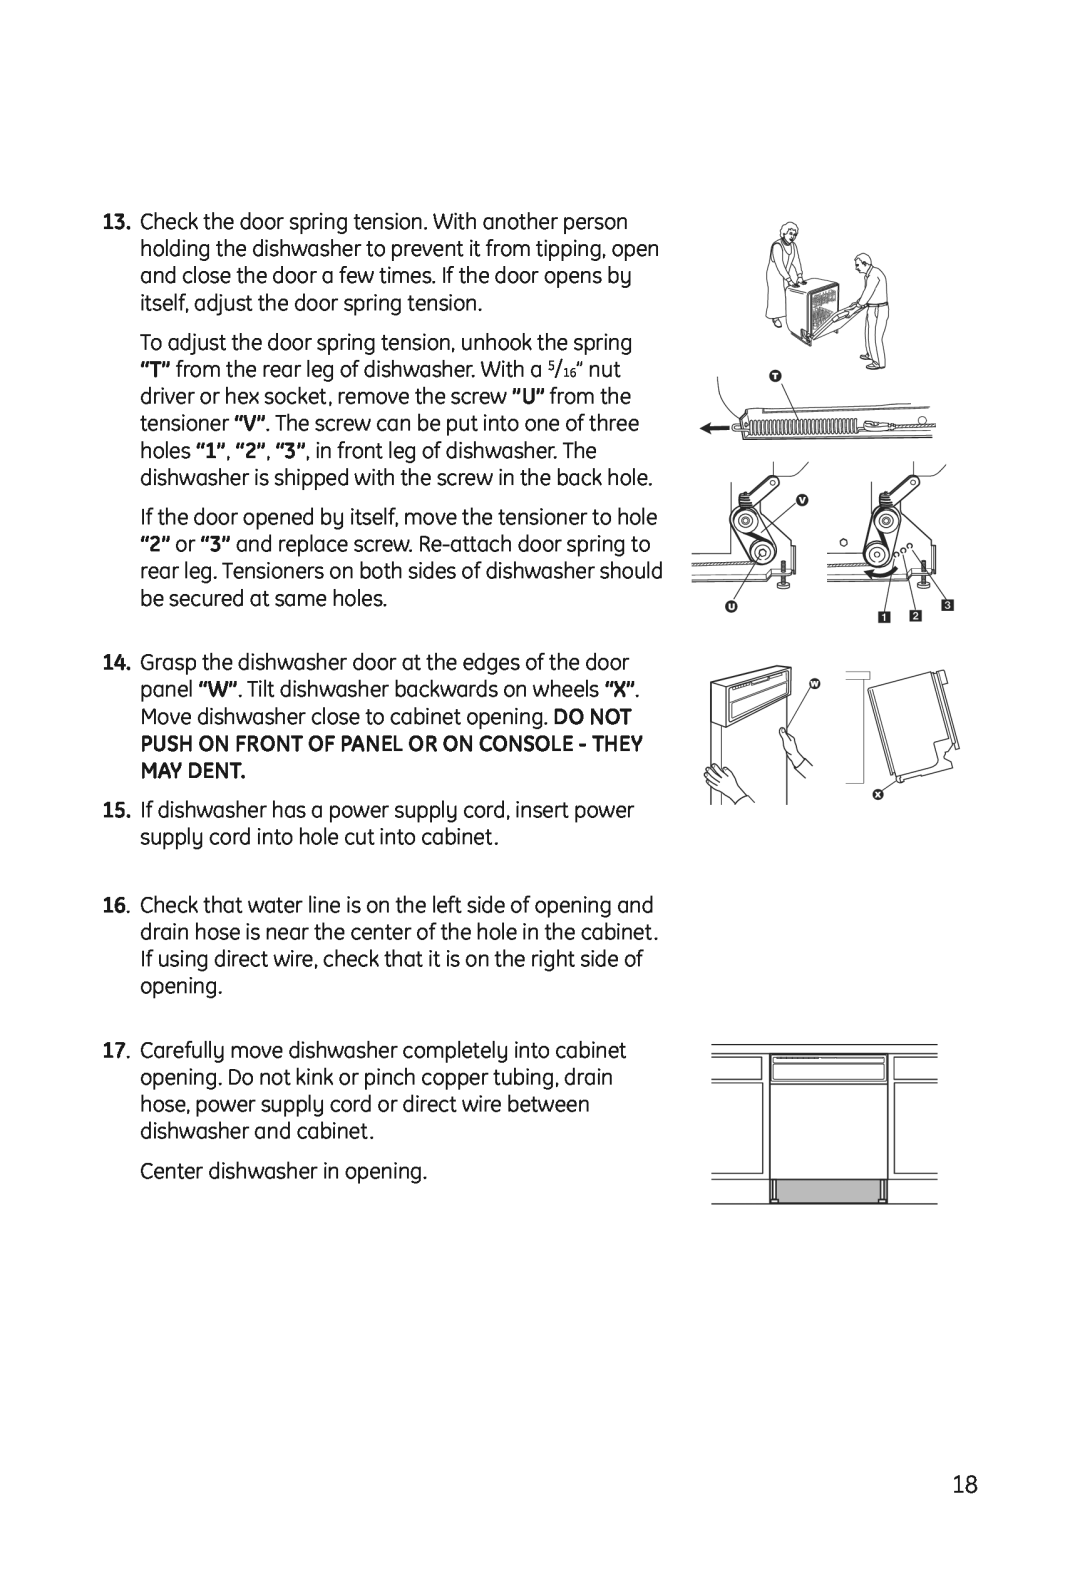 Haier DWL3025 installation manual Push On Front Of Panel Or On Console - They May Dent 